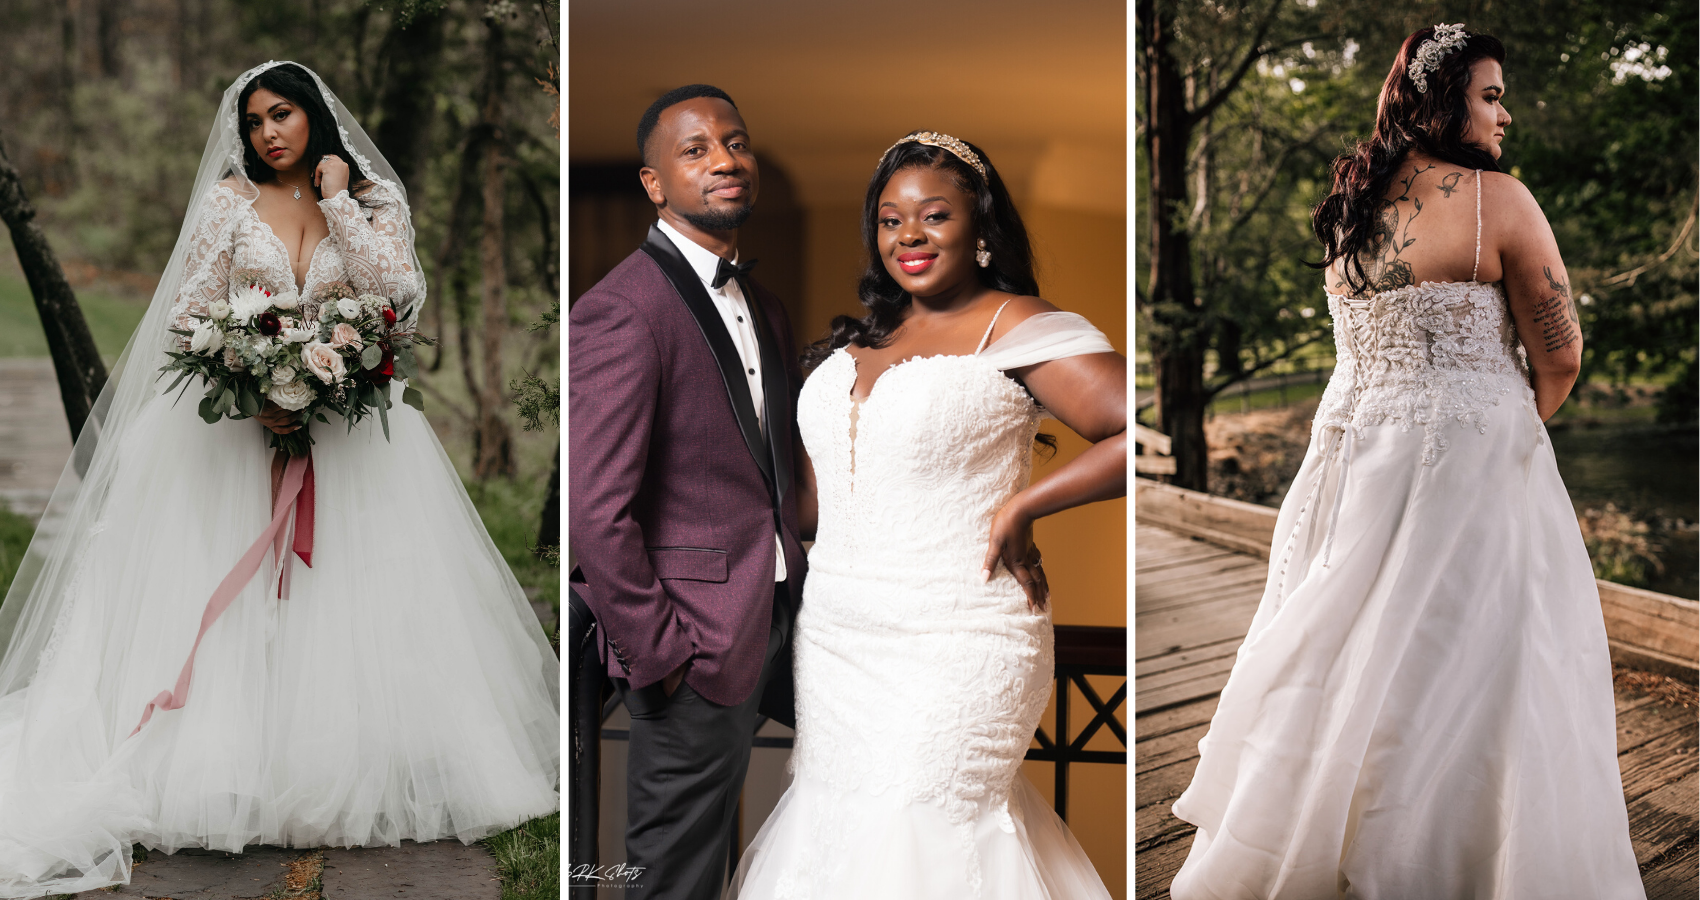 Real Curvy Brides Blog Header With Brides Wearing Dresses Called Mallory Dawn By Maggie Sottero, Alistaire Lynette By Maggie Sottero, And Parker By Maggie Sottero